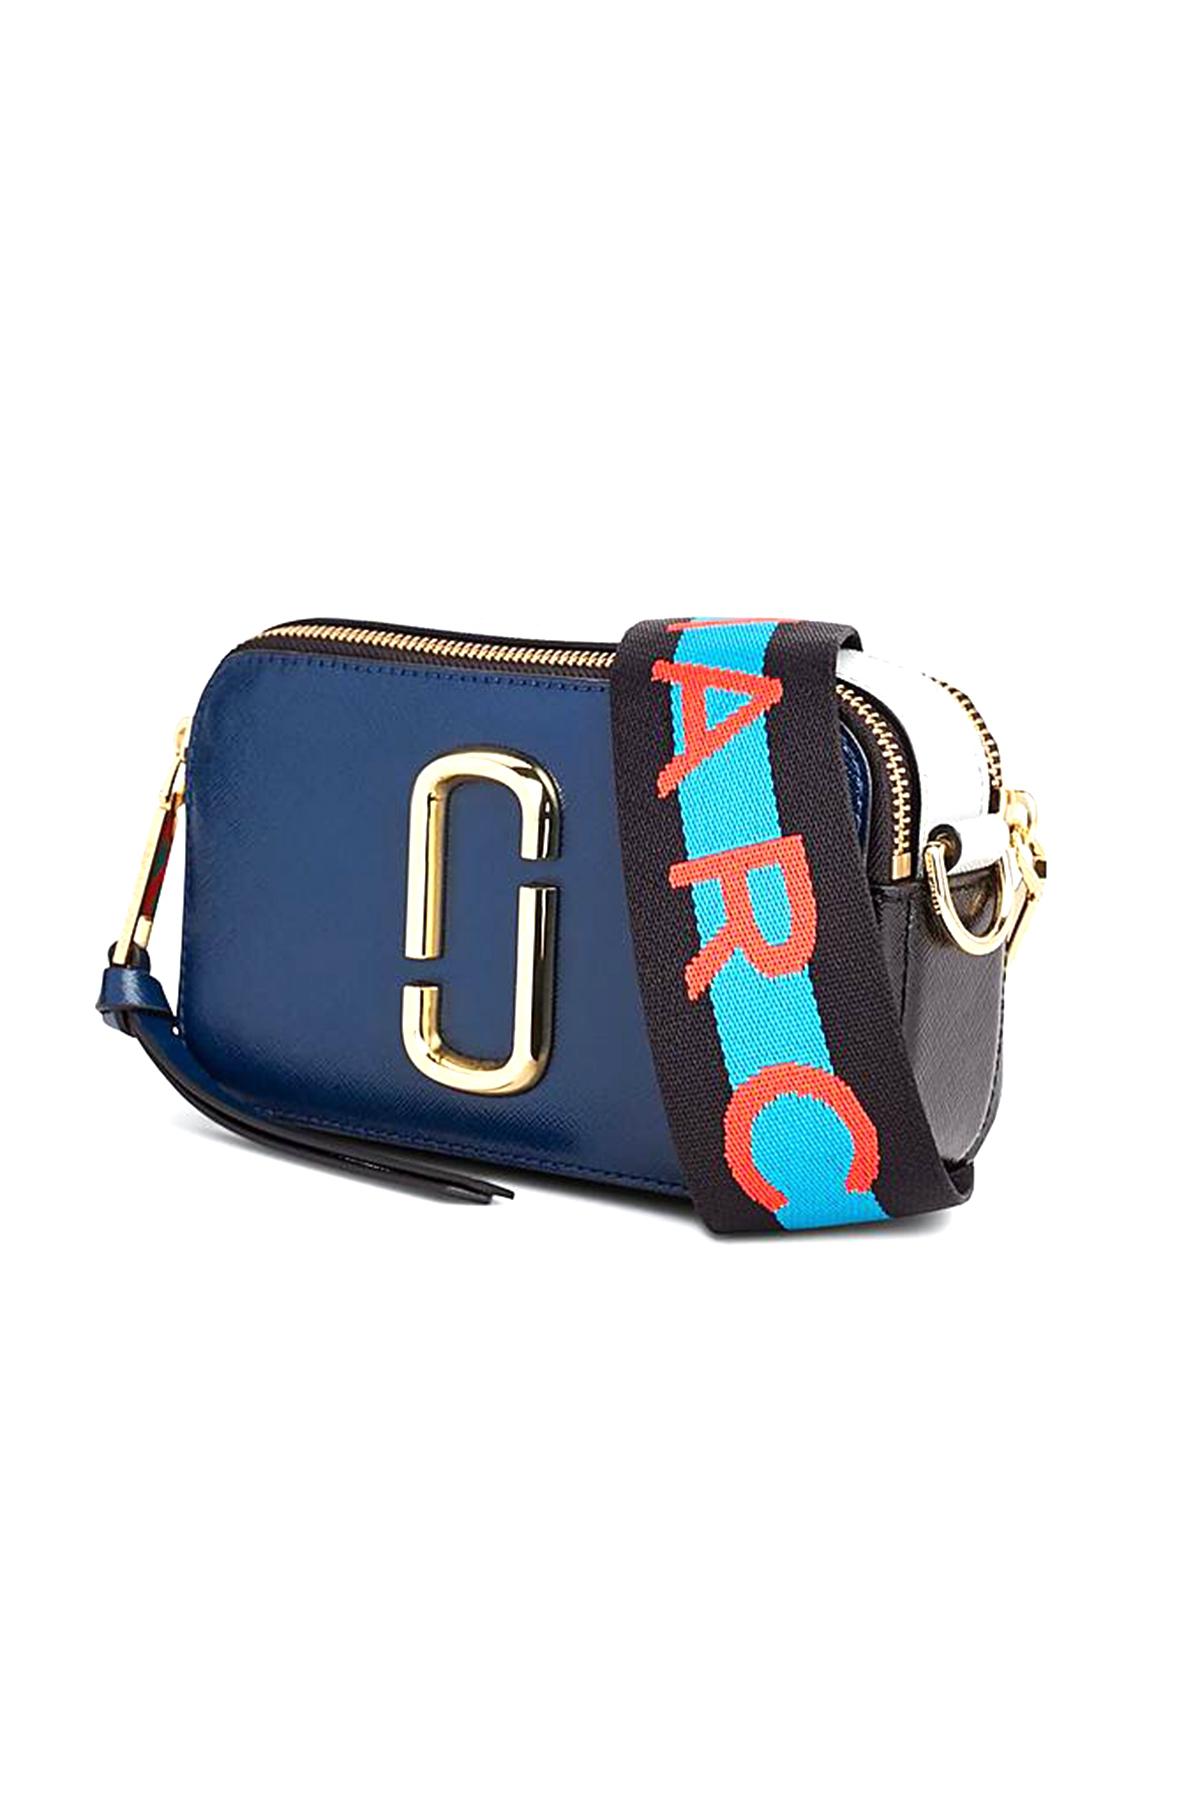 Marc Jacobs The Snapshot Bag New Blue